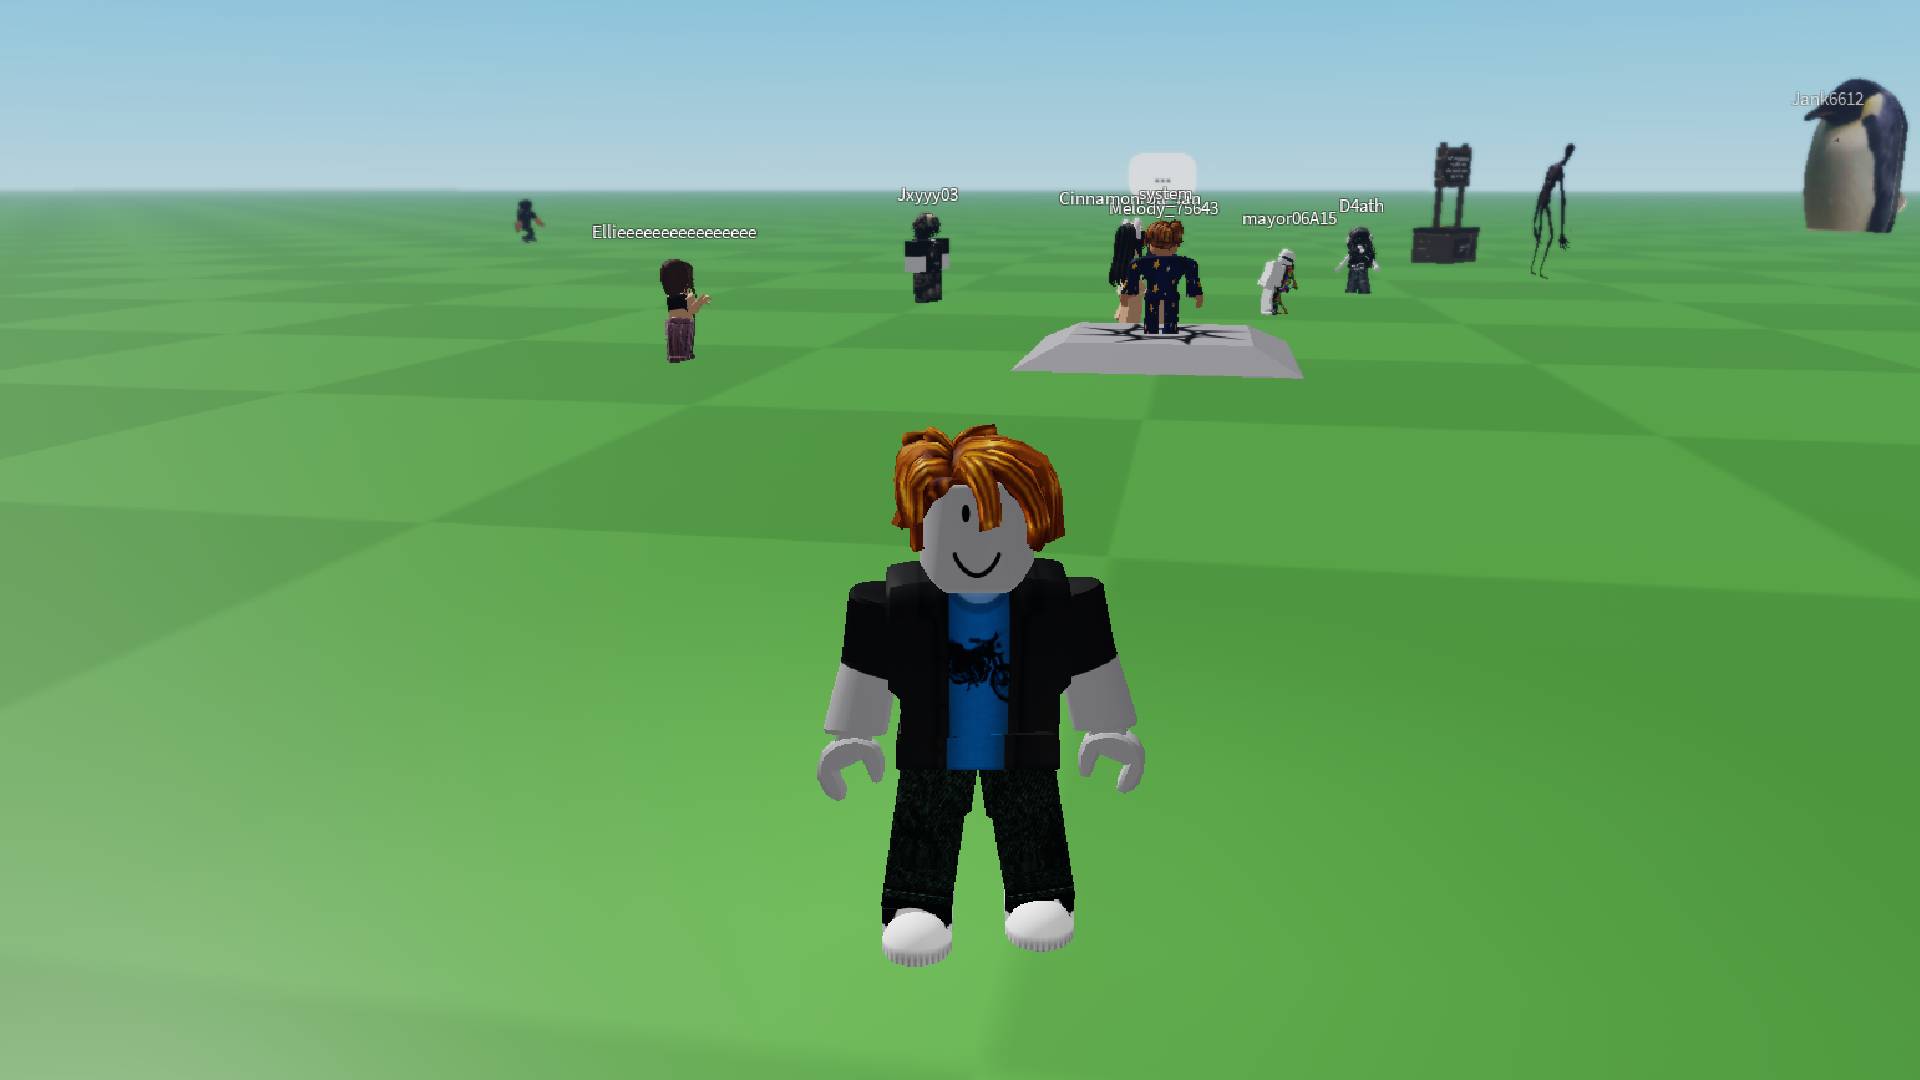 I tried to make One Piece characters' face in a Roblox style, It